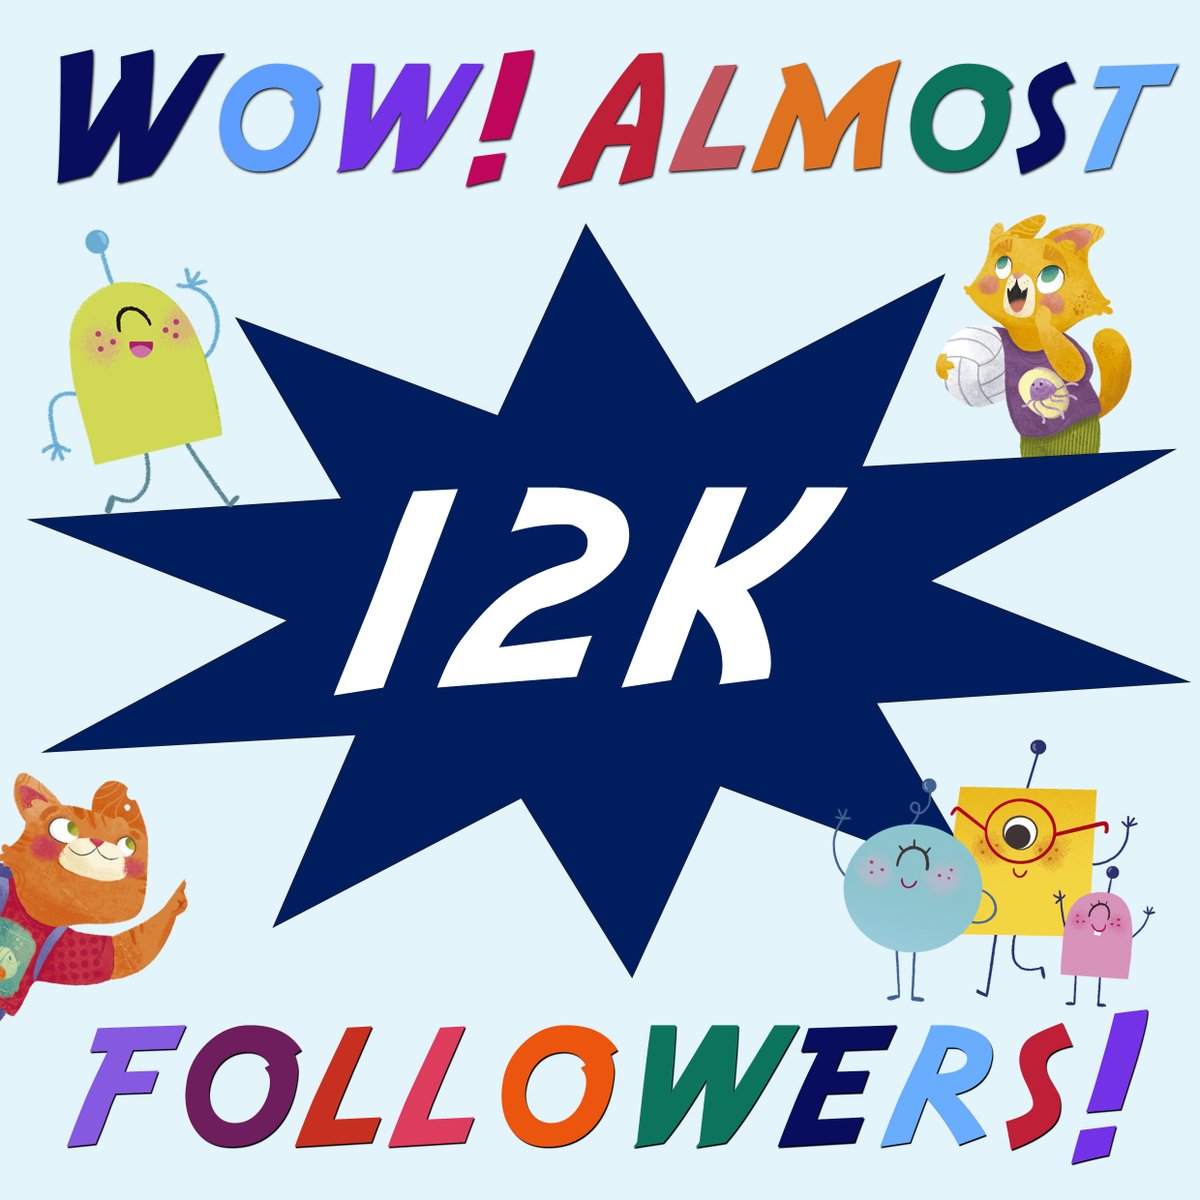 🥳 Thank you everyone! We've almost reached 12K Twitter followers... follow us if you haven't already and help us to reach this goal!

#childrensbooks #maverickbooks #booktwt #picturebooks #earlyreaders #chapterreaders #graphicreaders #juniorfiction #middlegrade